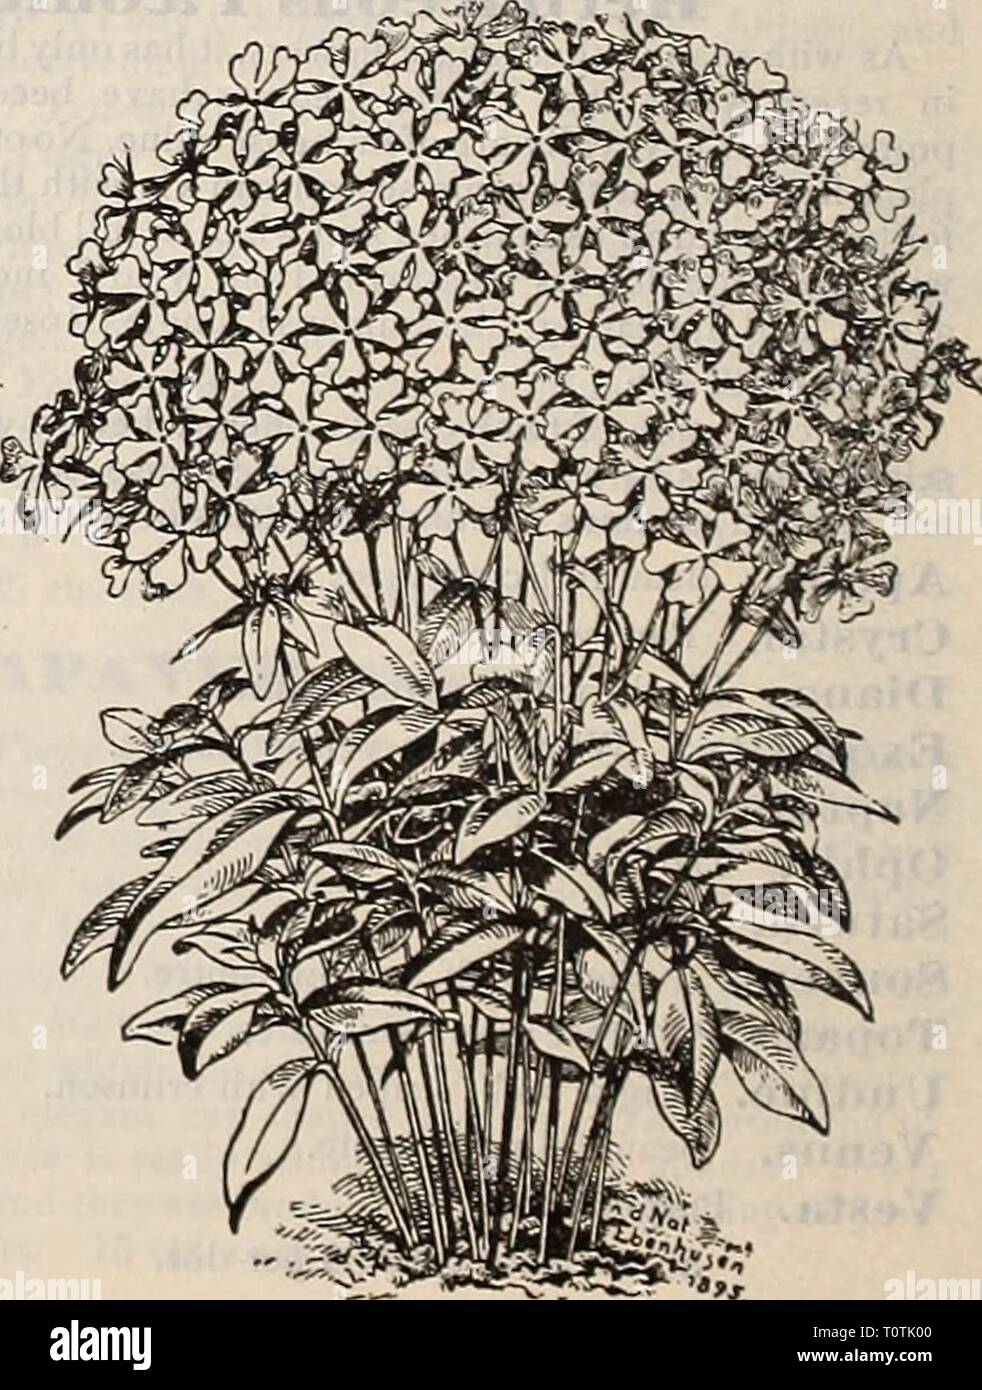 Dreer's 1901 garden calendar (1901) Dreer's 1901 garden calendar  dreers1901garden1901henr Year: 1901  Phlox Subulata Divaricata Canadensis. One of our native varieties that is but rarely met with, and a plant that is certain to meet with much favor when better known, as nothing can produce such a cheerful corner in the garden in the very early sprin&lt;j; frequently beginning to bloom early in April, it con- tinues until about the middle of June, with large bright lilac-colored flowers, which are produced on stems about 10 inches high, in large showy heads, and are very fragrant. (See cut.) 1 Stock Photo